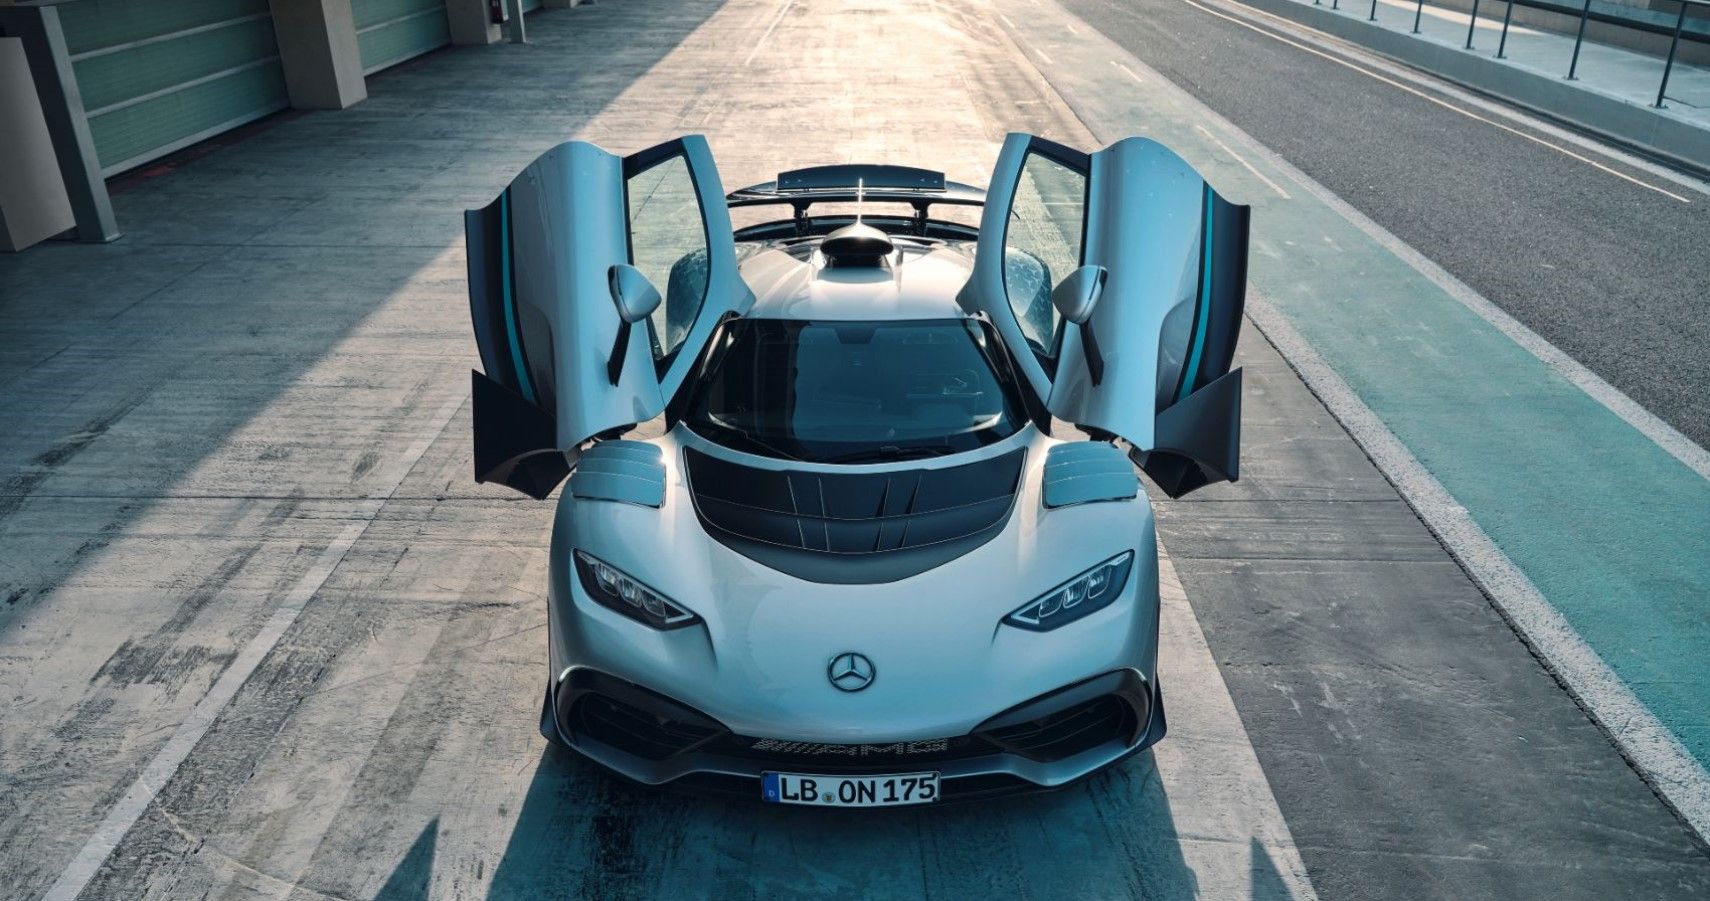 Mercedes-AMG One hd wallpaper view